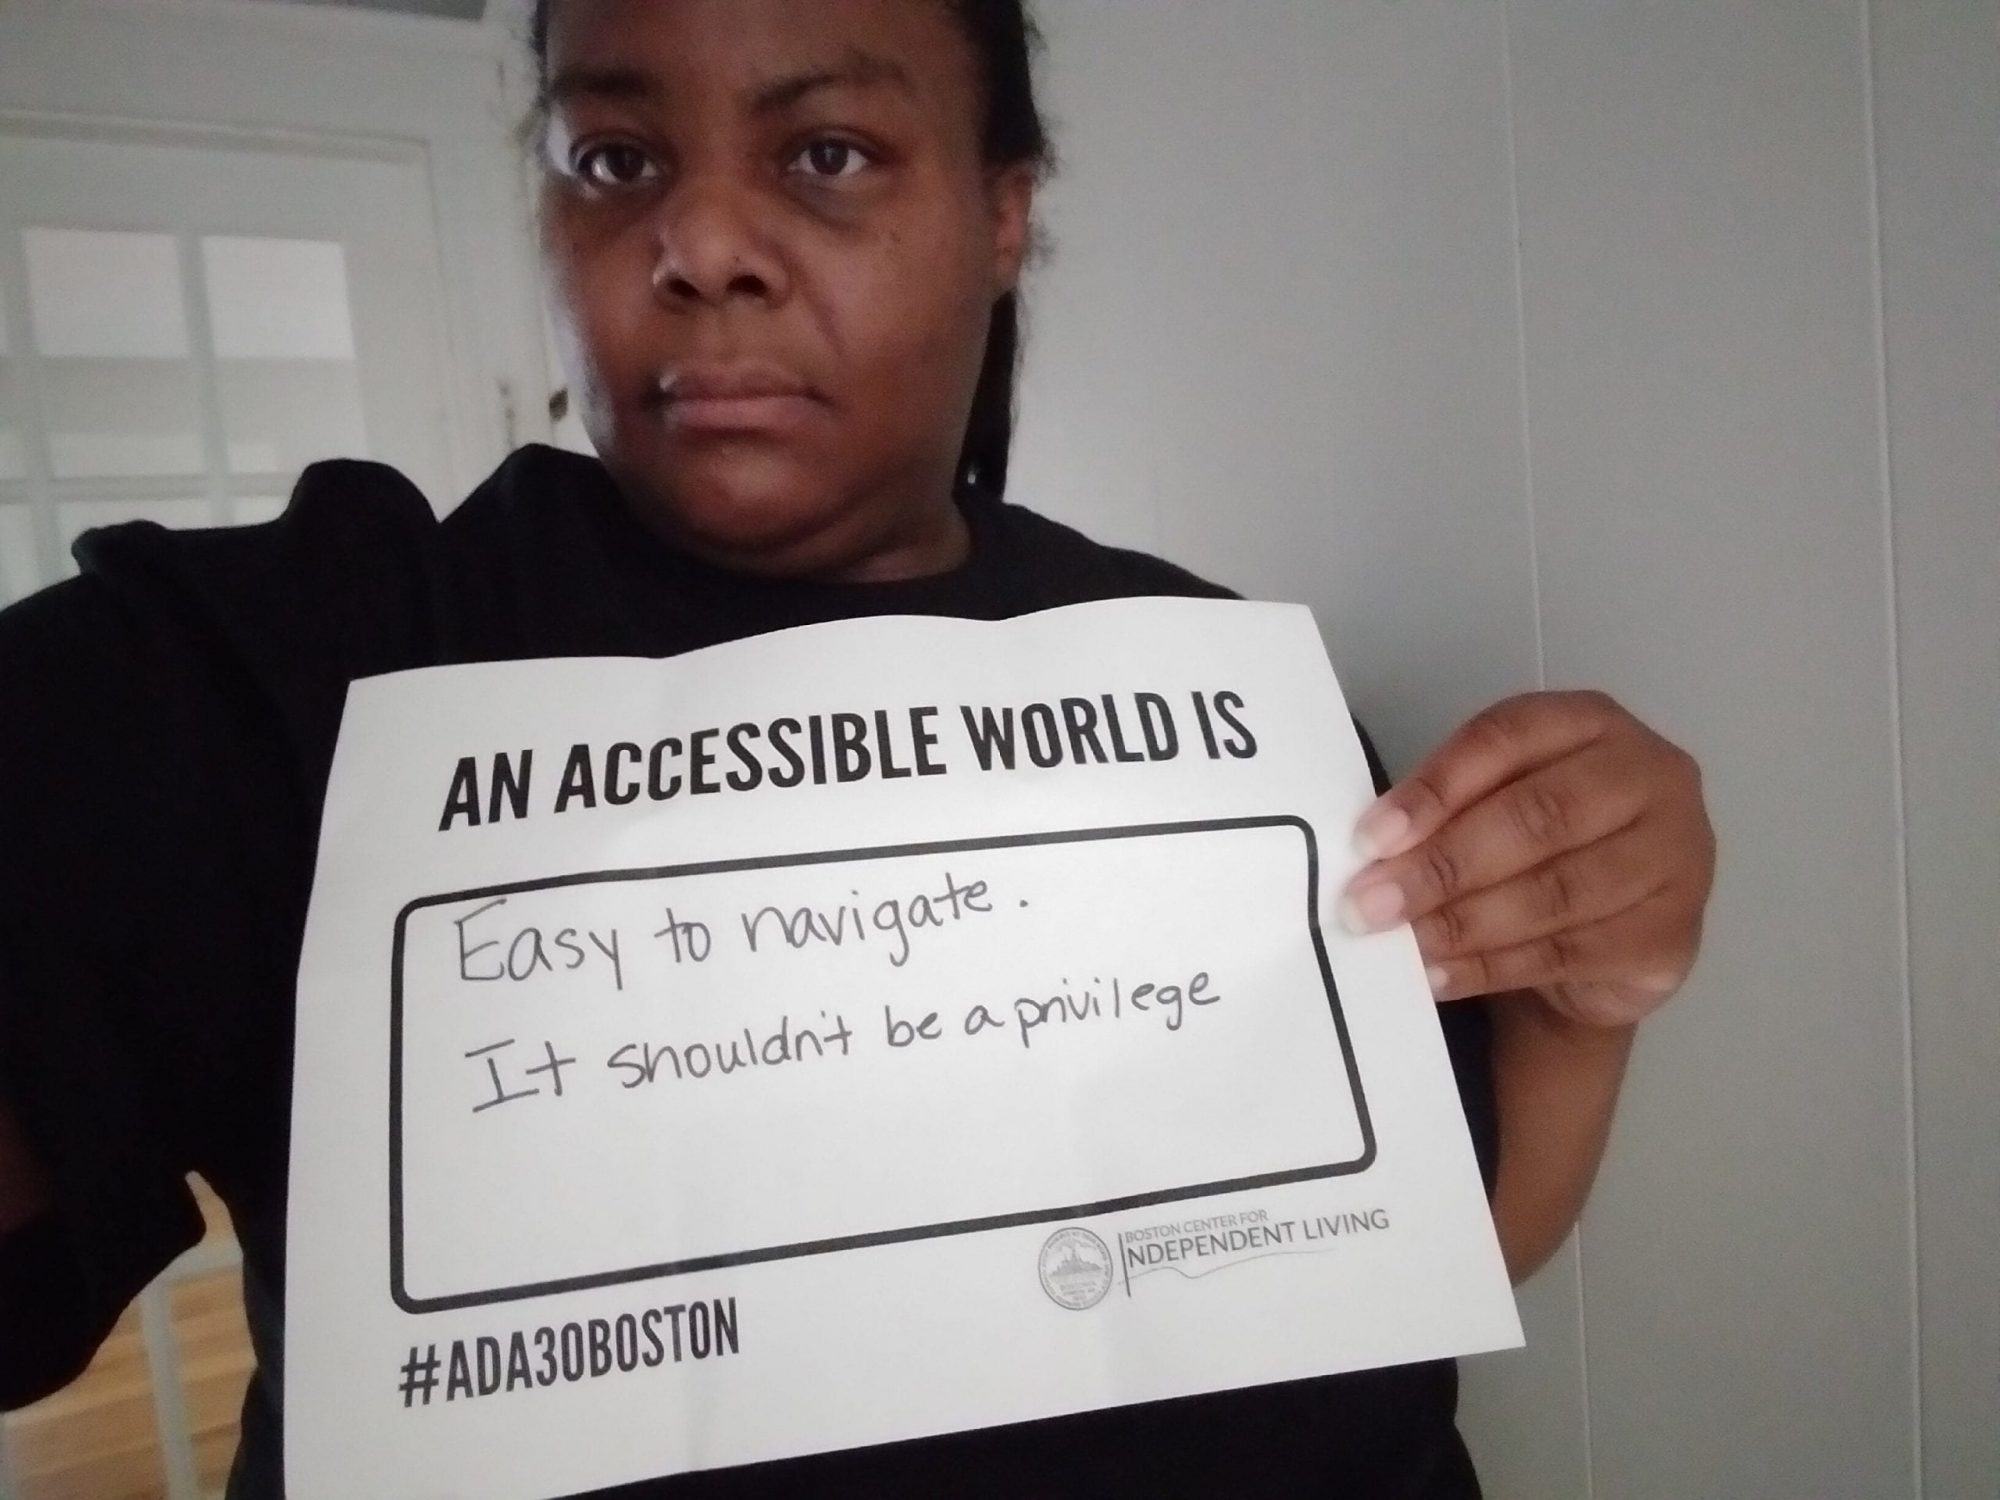 A person wearing a black ADA 30 t-shirt holds a sign that reads AN ACCESSIBLE WORLD IS EASY TO NAVIGATE, IT SHOULDN'T BE A PRIVILEGE.